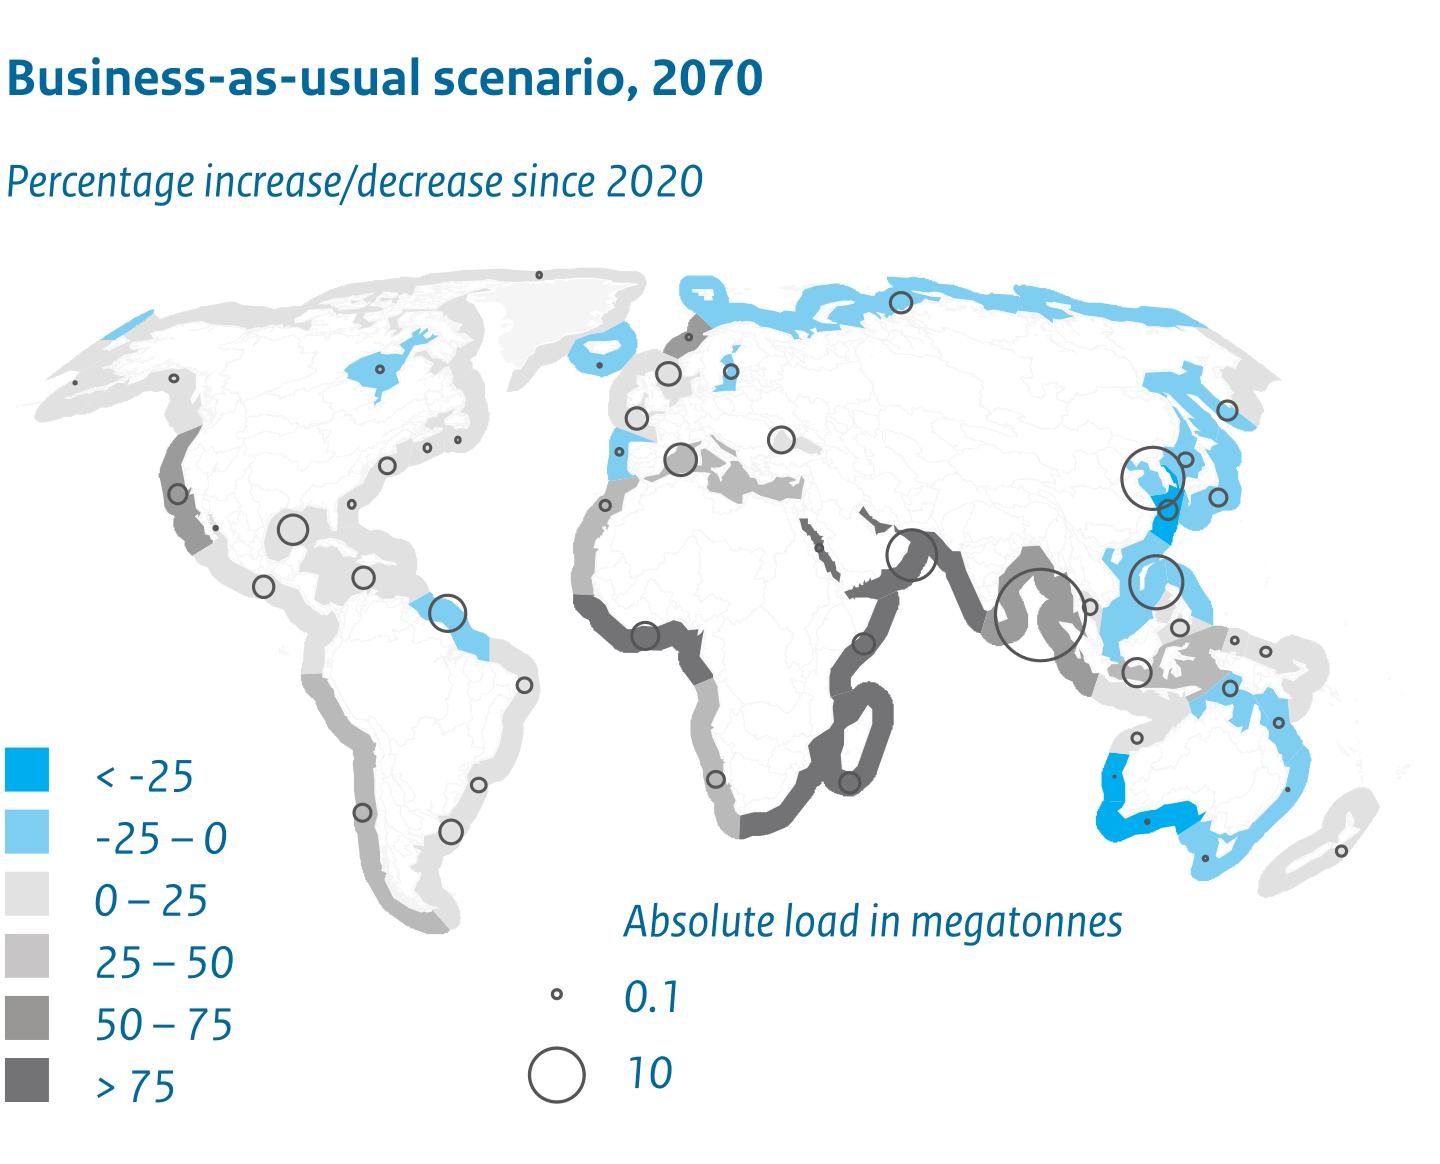 Under a business-as-usual scenario, nitrogen load to coastal seas is projected to increase, between 2020 and 2070, by more than 75% for Africa and Southeast Asia, and by less than 75% for North and South America, South Asia and Europe. In Southeast Asia and Australia, on the other hand, it is projected to decrease by up to 25%.